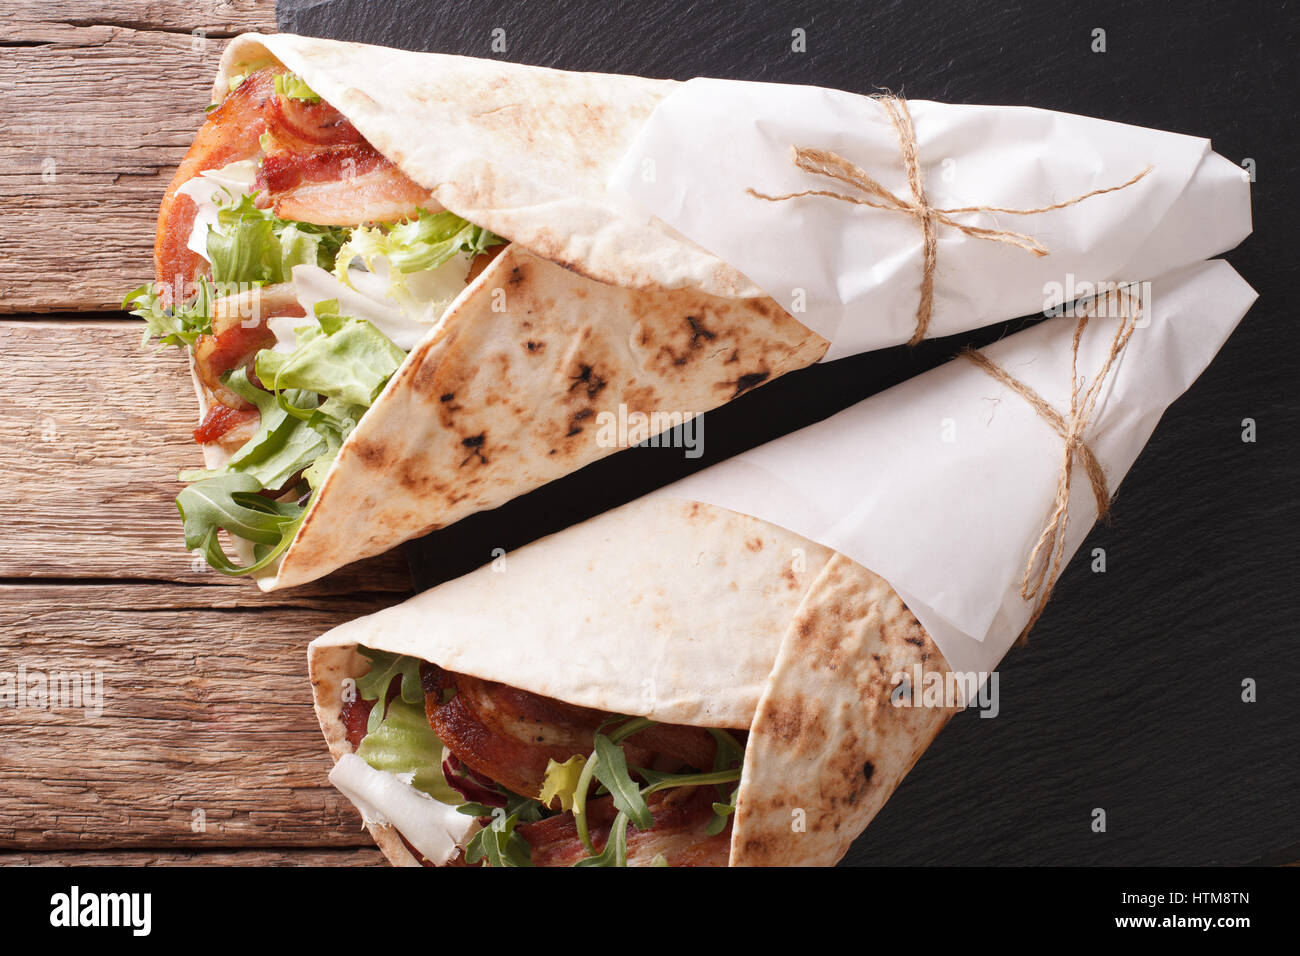 Fried bacon and salad wrapped in pita bread close-up on a table. horizontal view from above Stock Photo